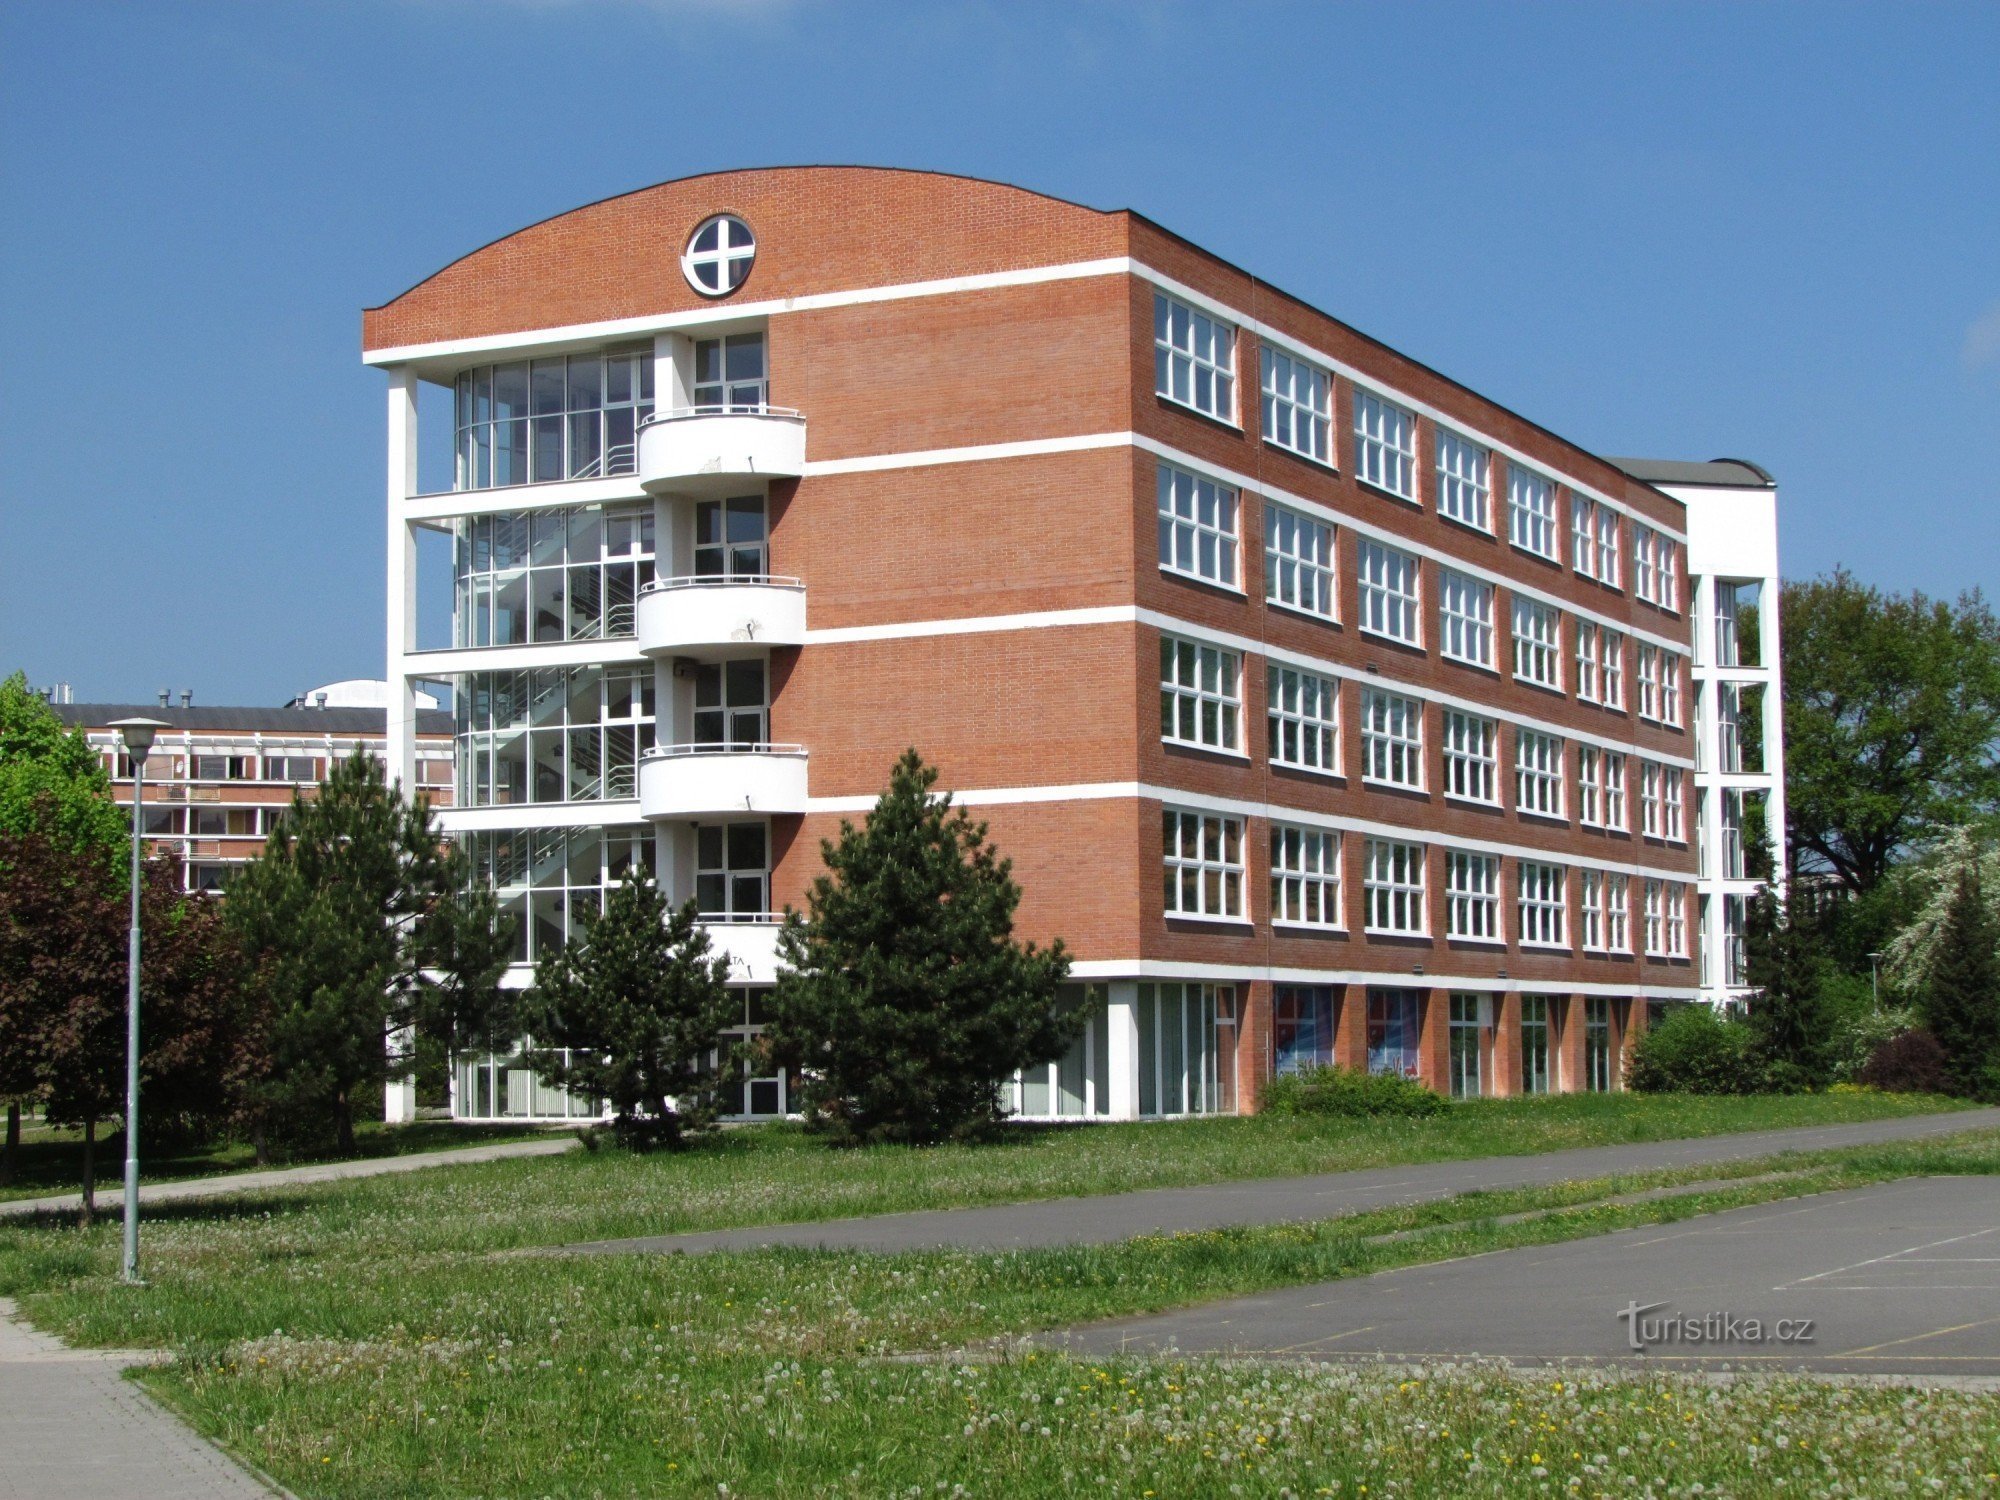 Zlín - Secondary and higher health school + Home for the elderly